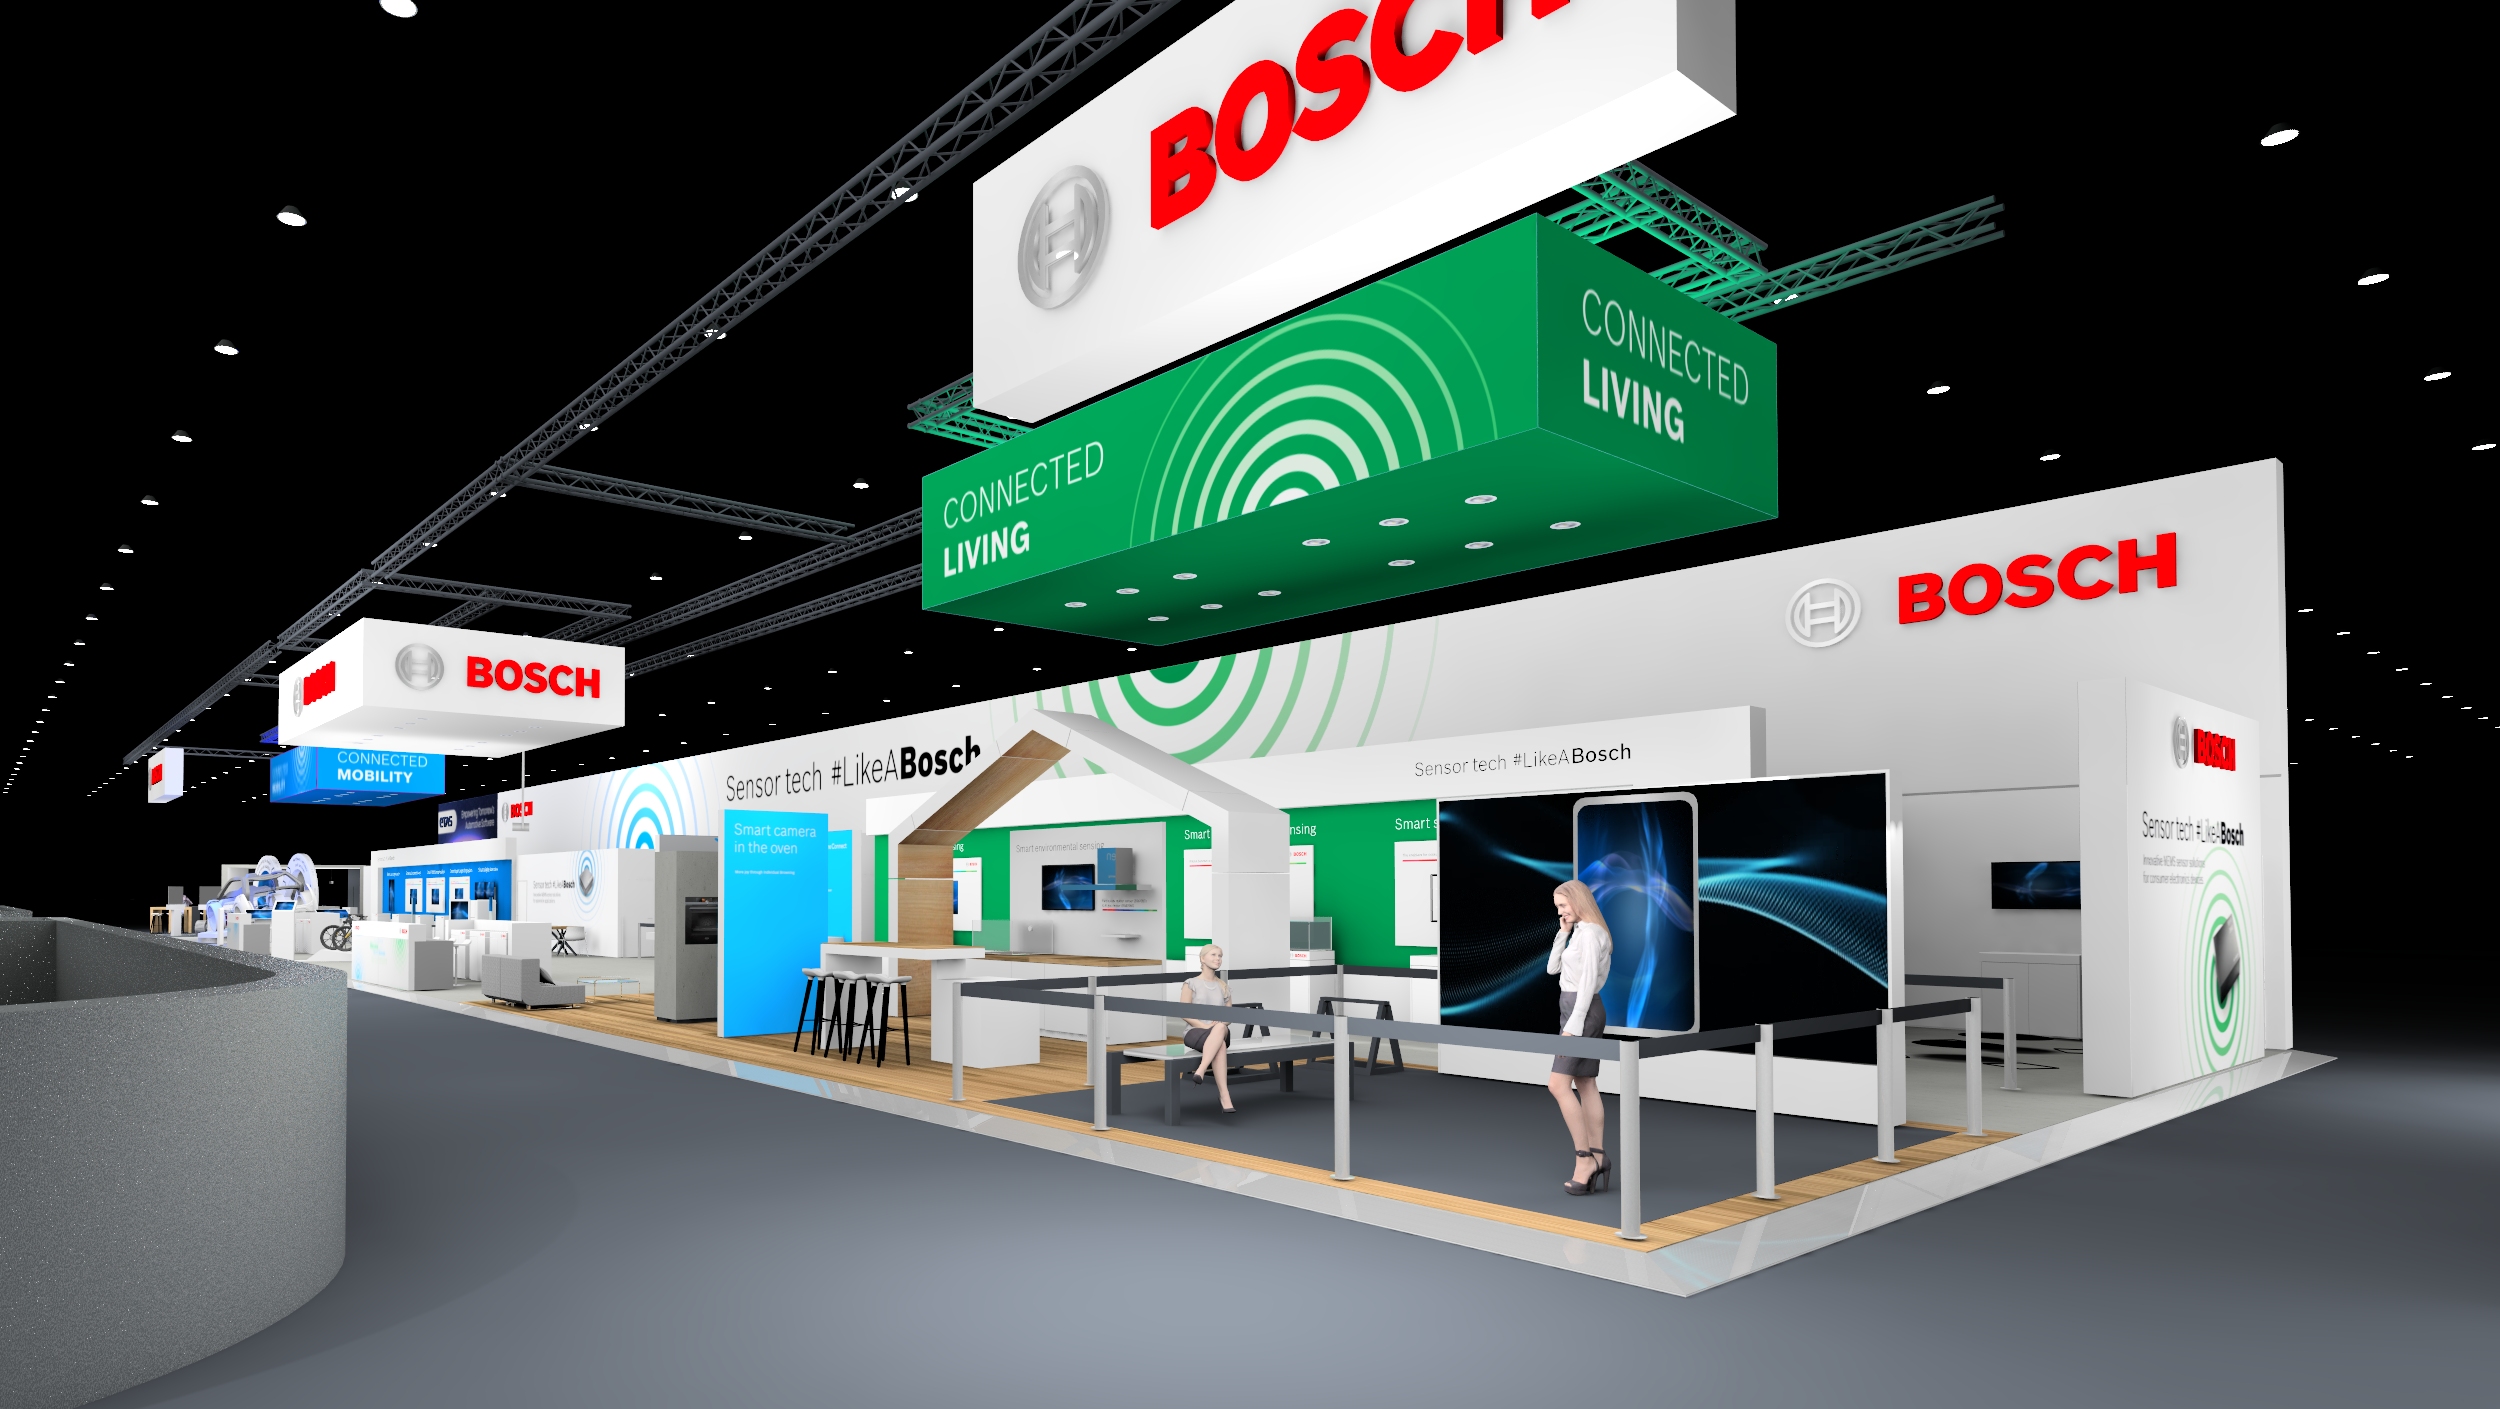 Bosch booth located in Central Hall